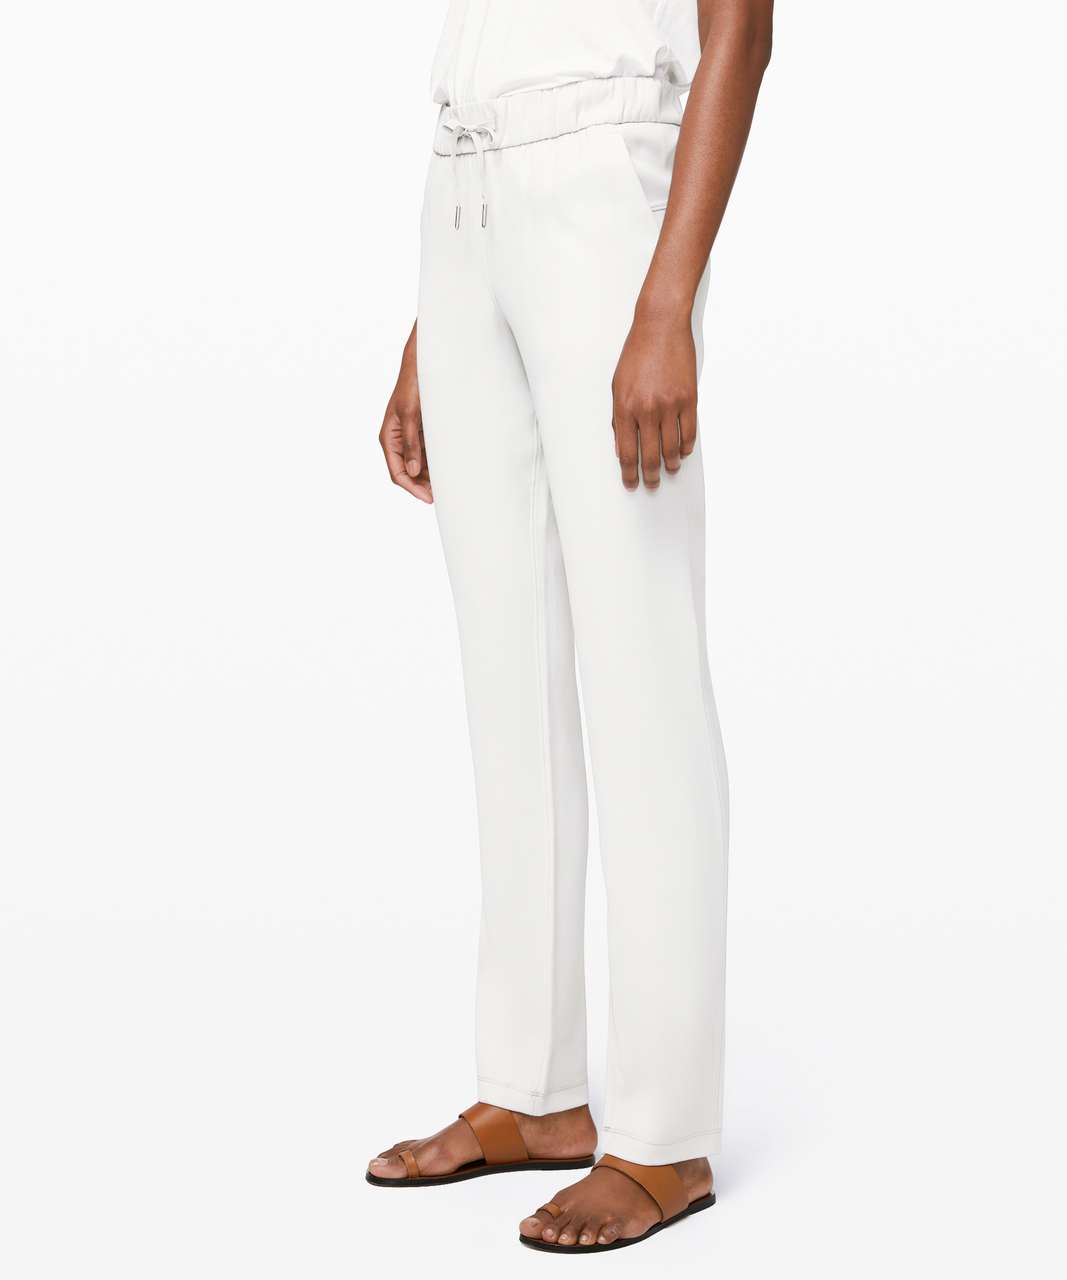 Lululemon On the Fly Pant Tall *Woven - Silverstone